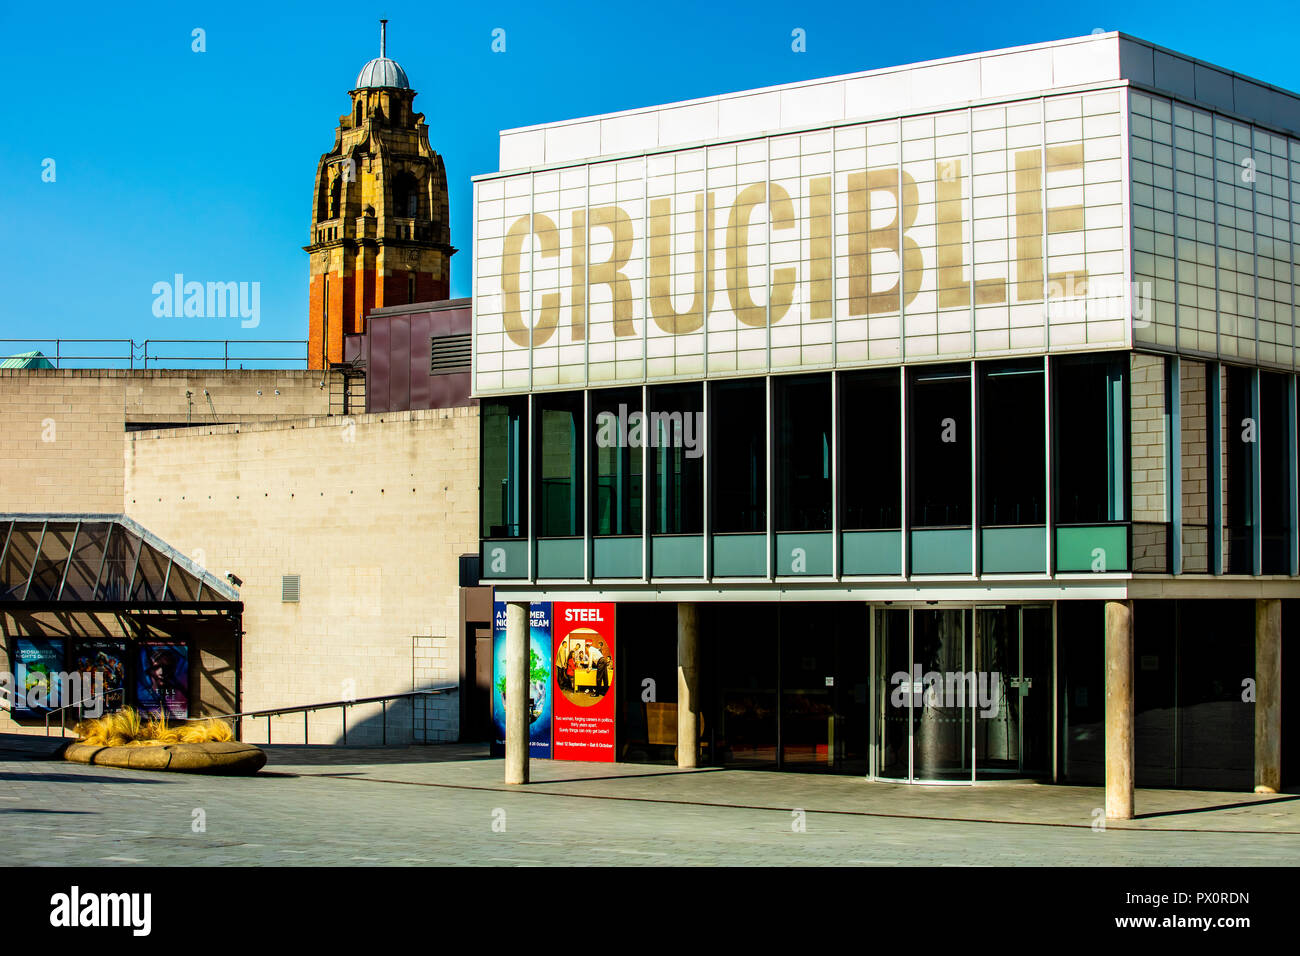 Sheffield, UK - Aug 29 2018: Crucible Theatre signage and architecture details of cinema building Stock Photo